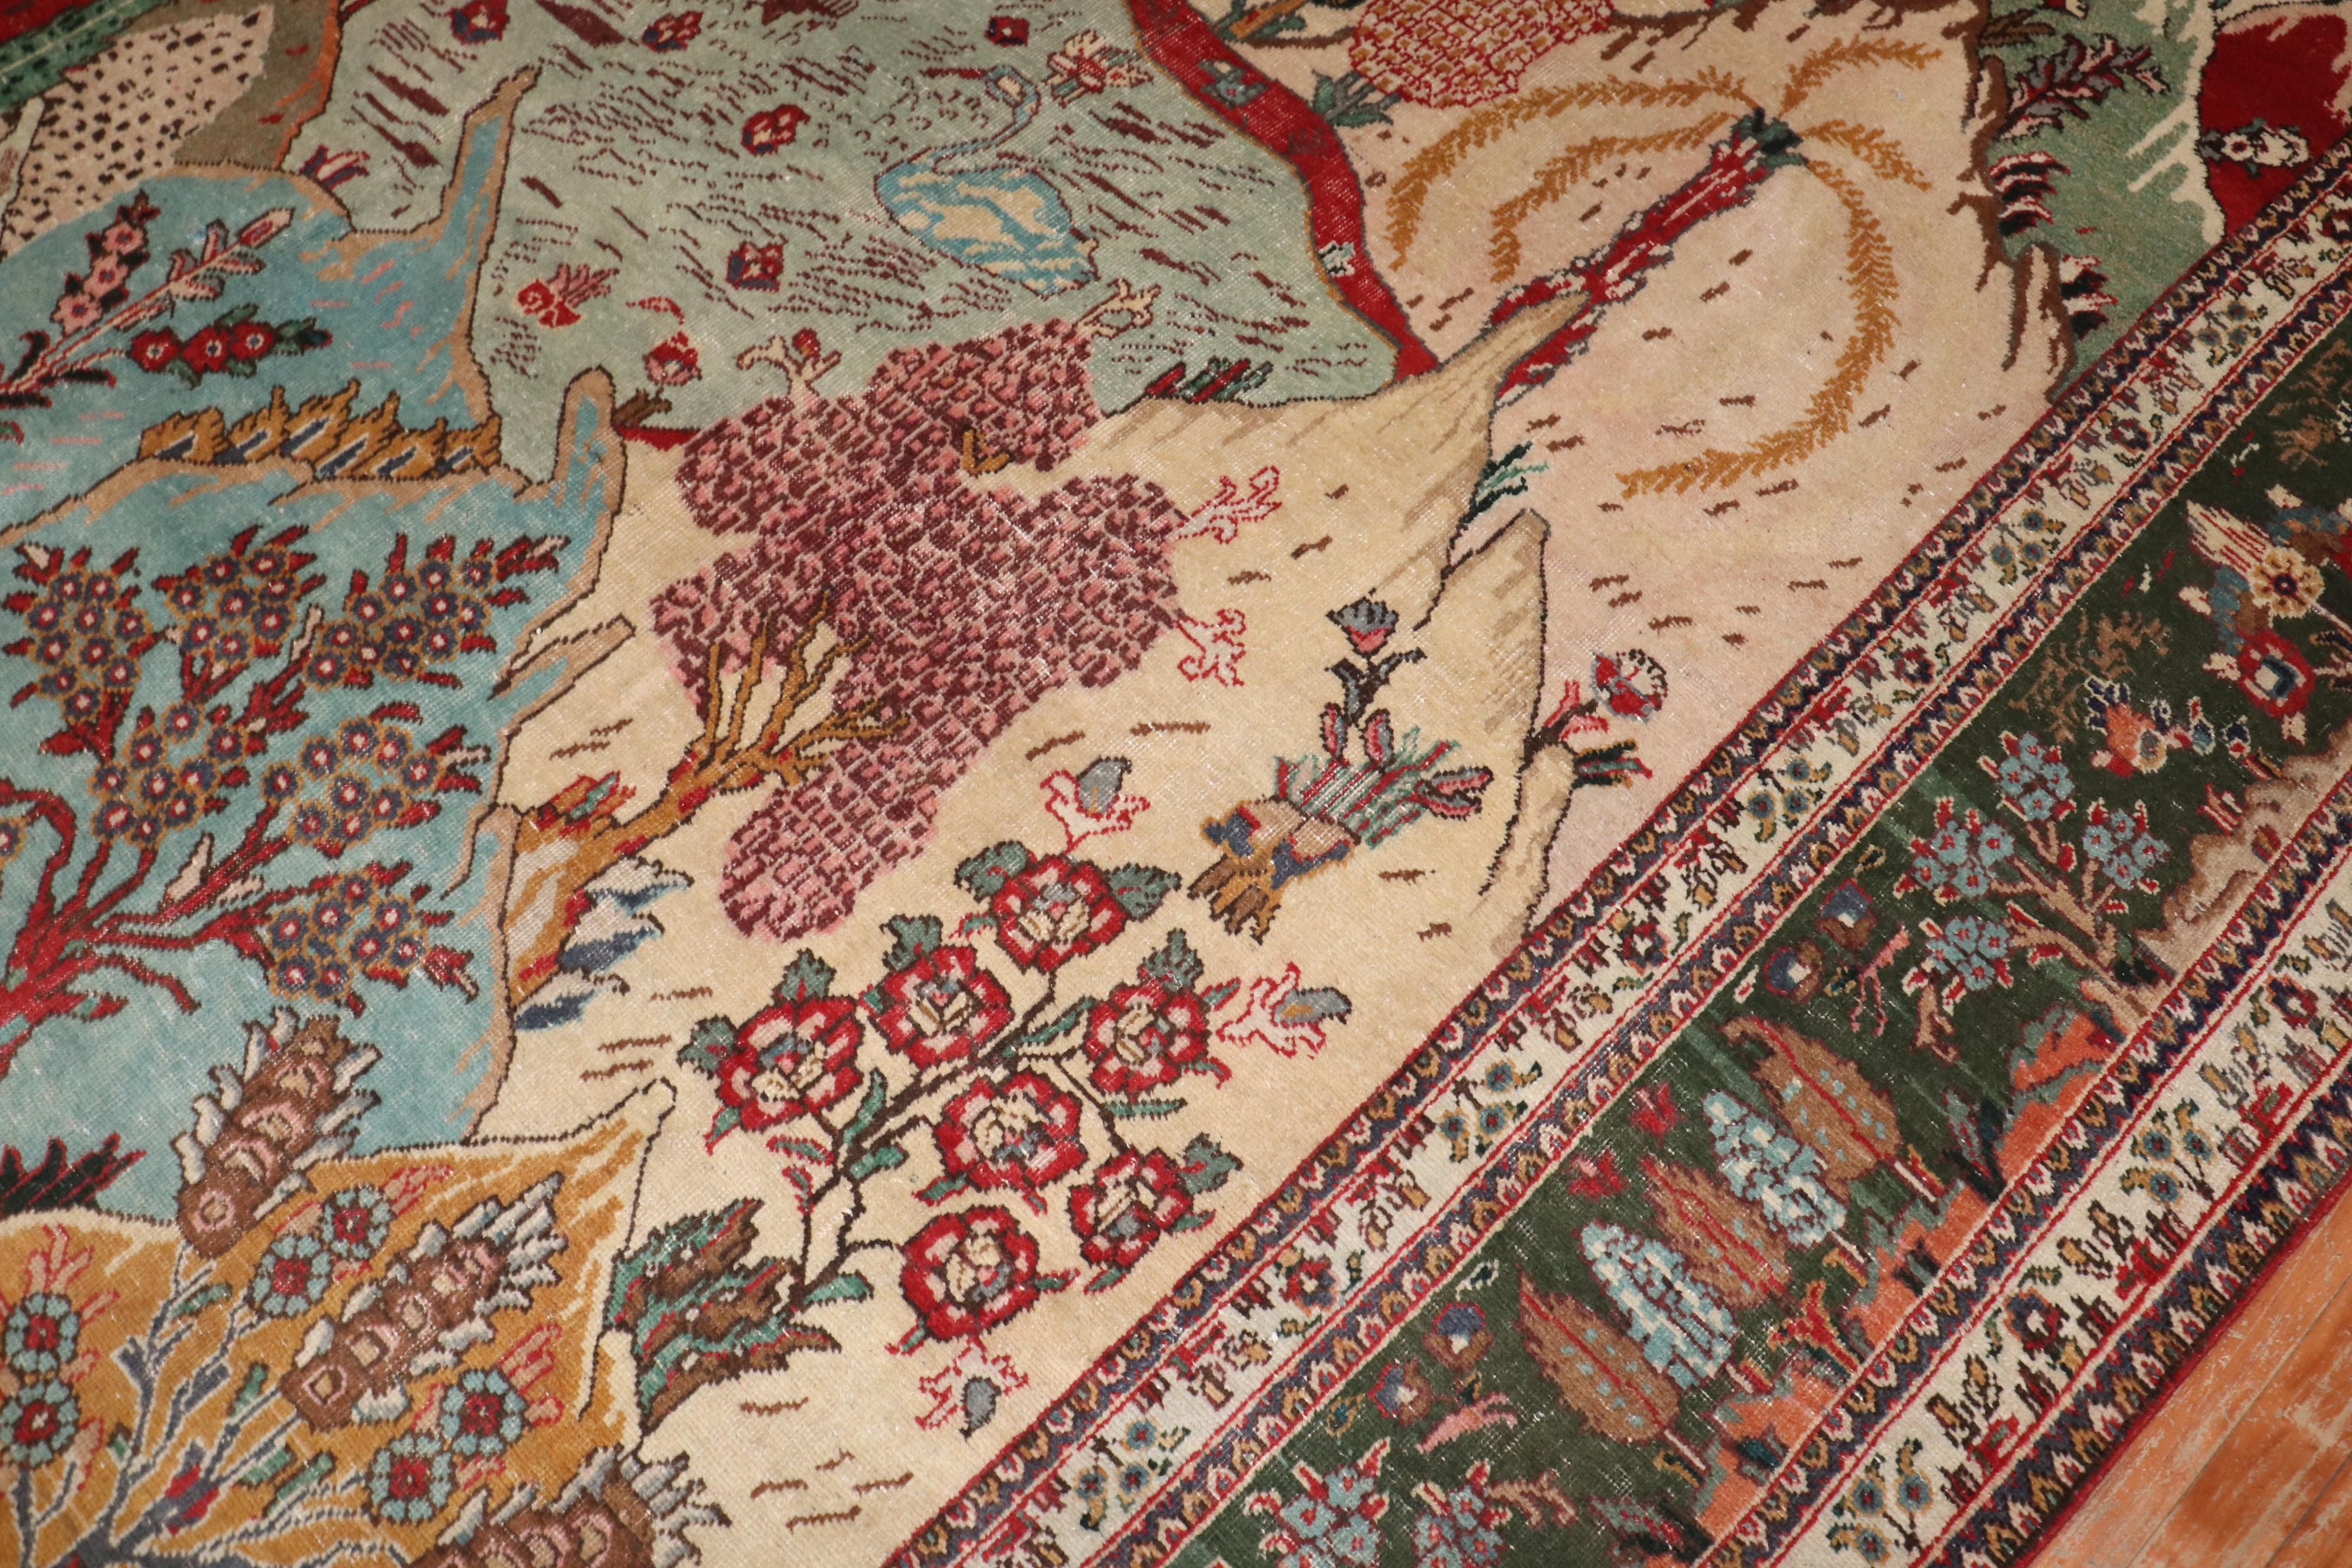 Zabihi Collection Vintage Persian Tabriz Pictorial Scene Carpet In Good Condition For Sale In New York, NY